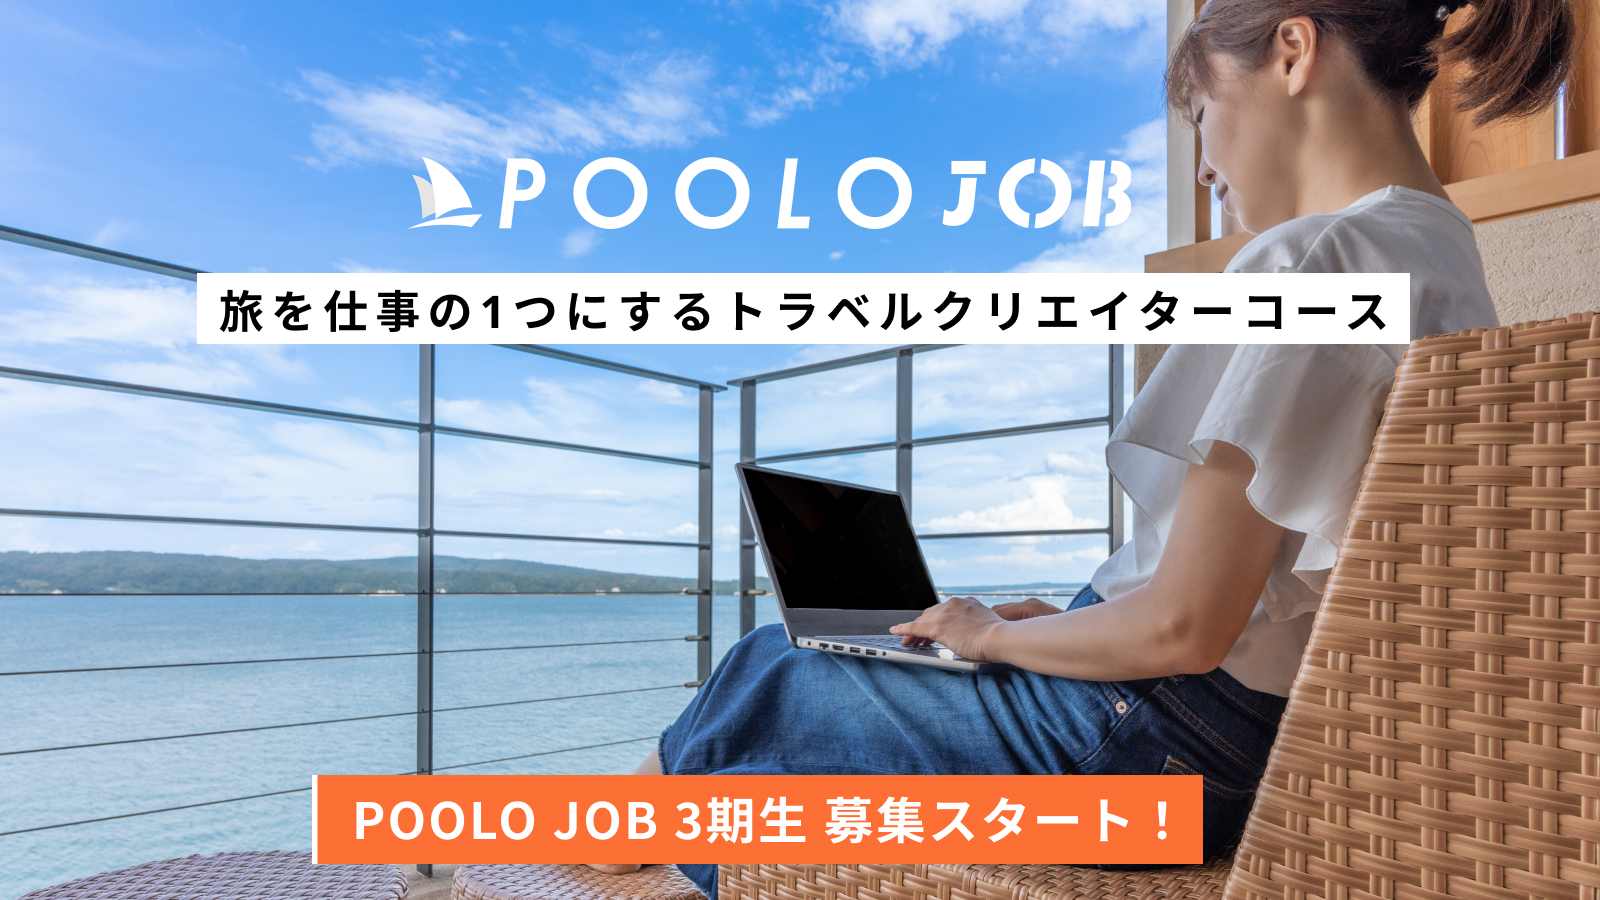 poolo job 3rd release